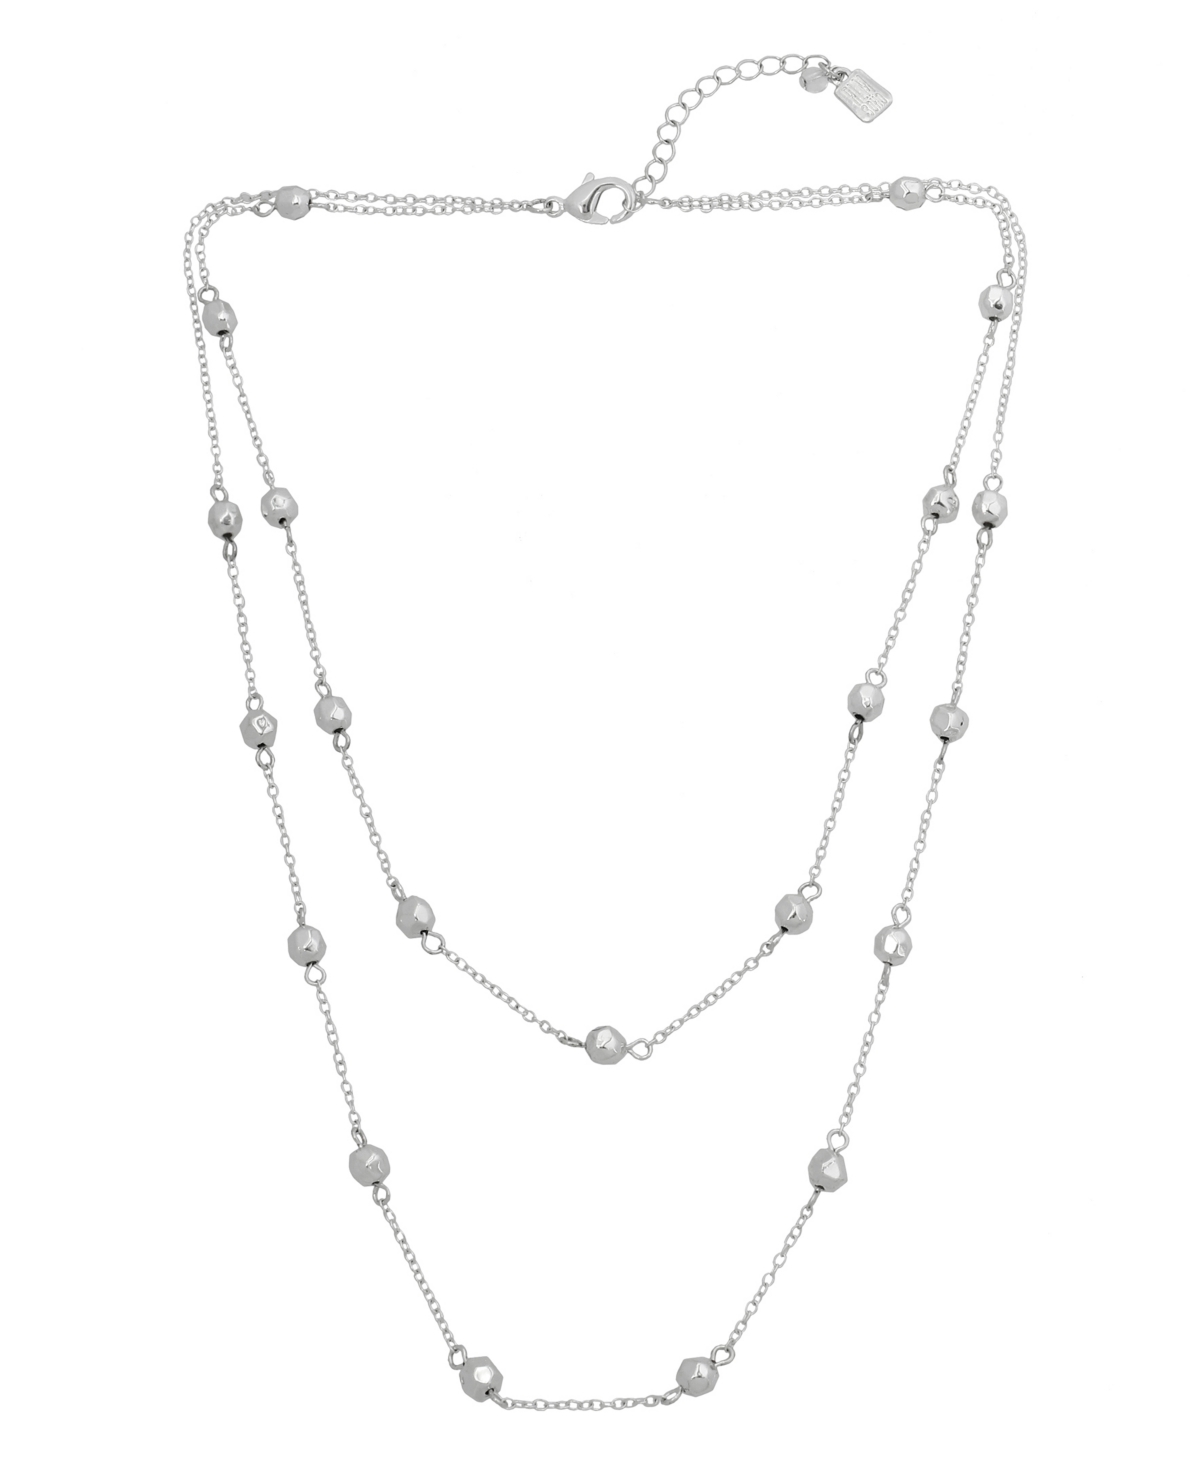 Beaded Layered Necklace - Silver